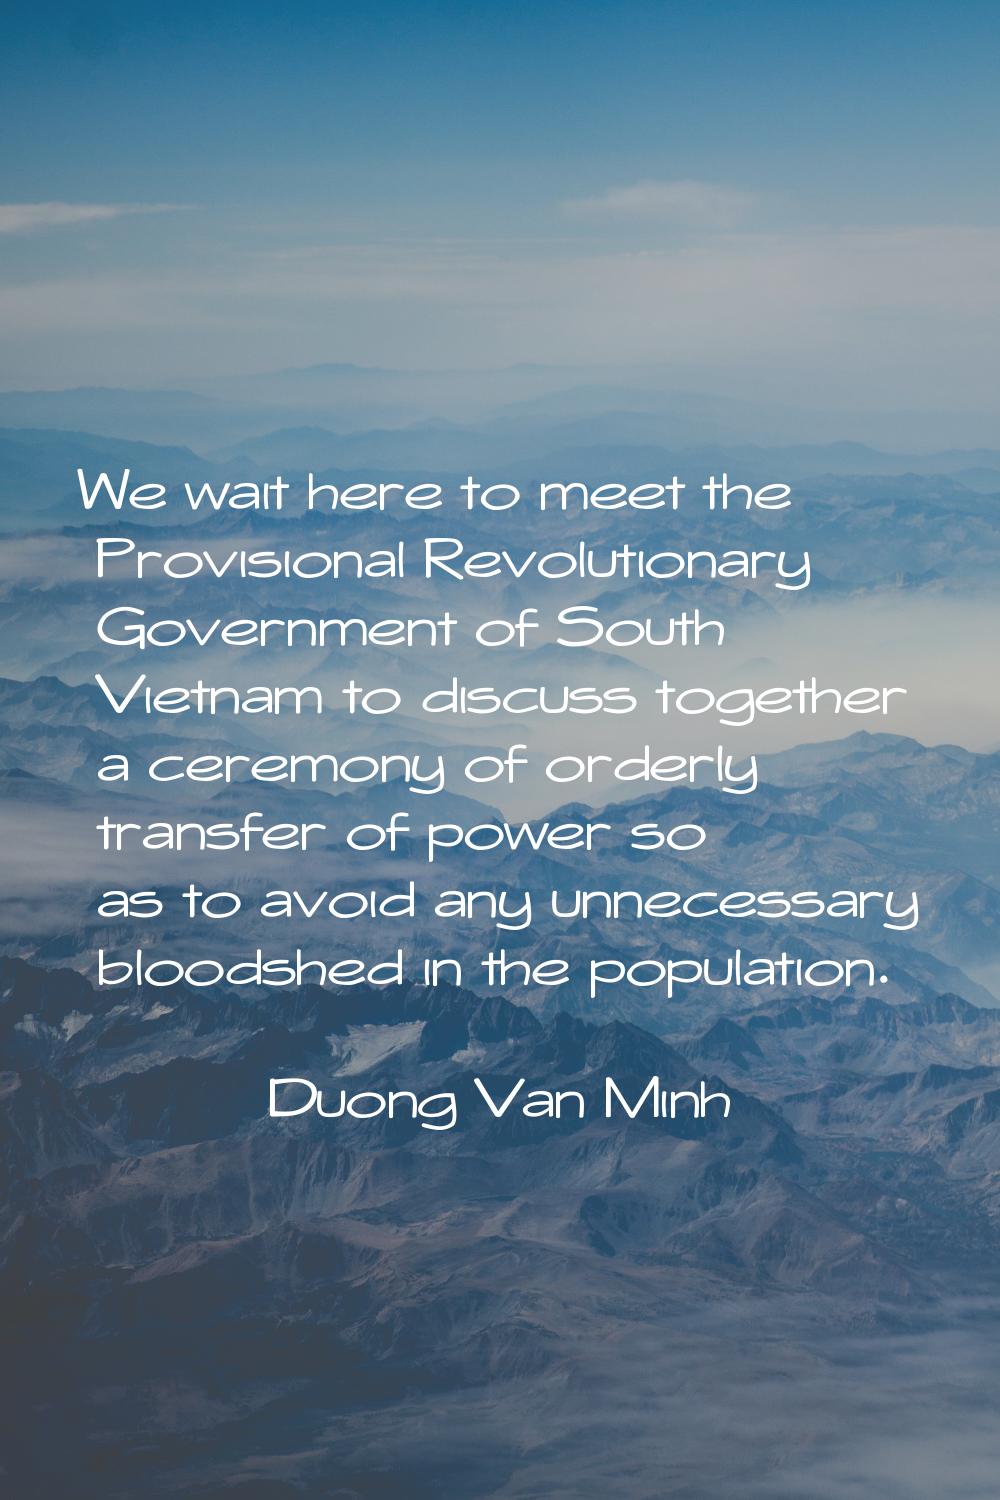 We wait here to meet the Provisional Revolutionary Government of South Vietnam to discuss together 